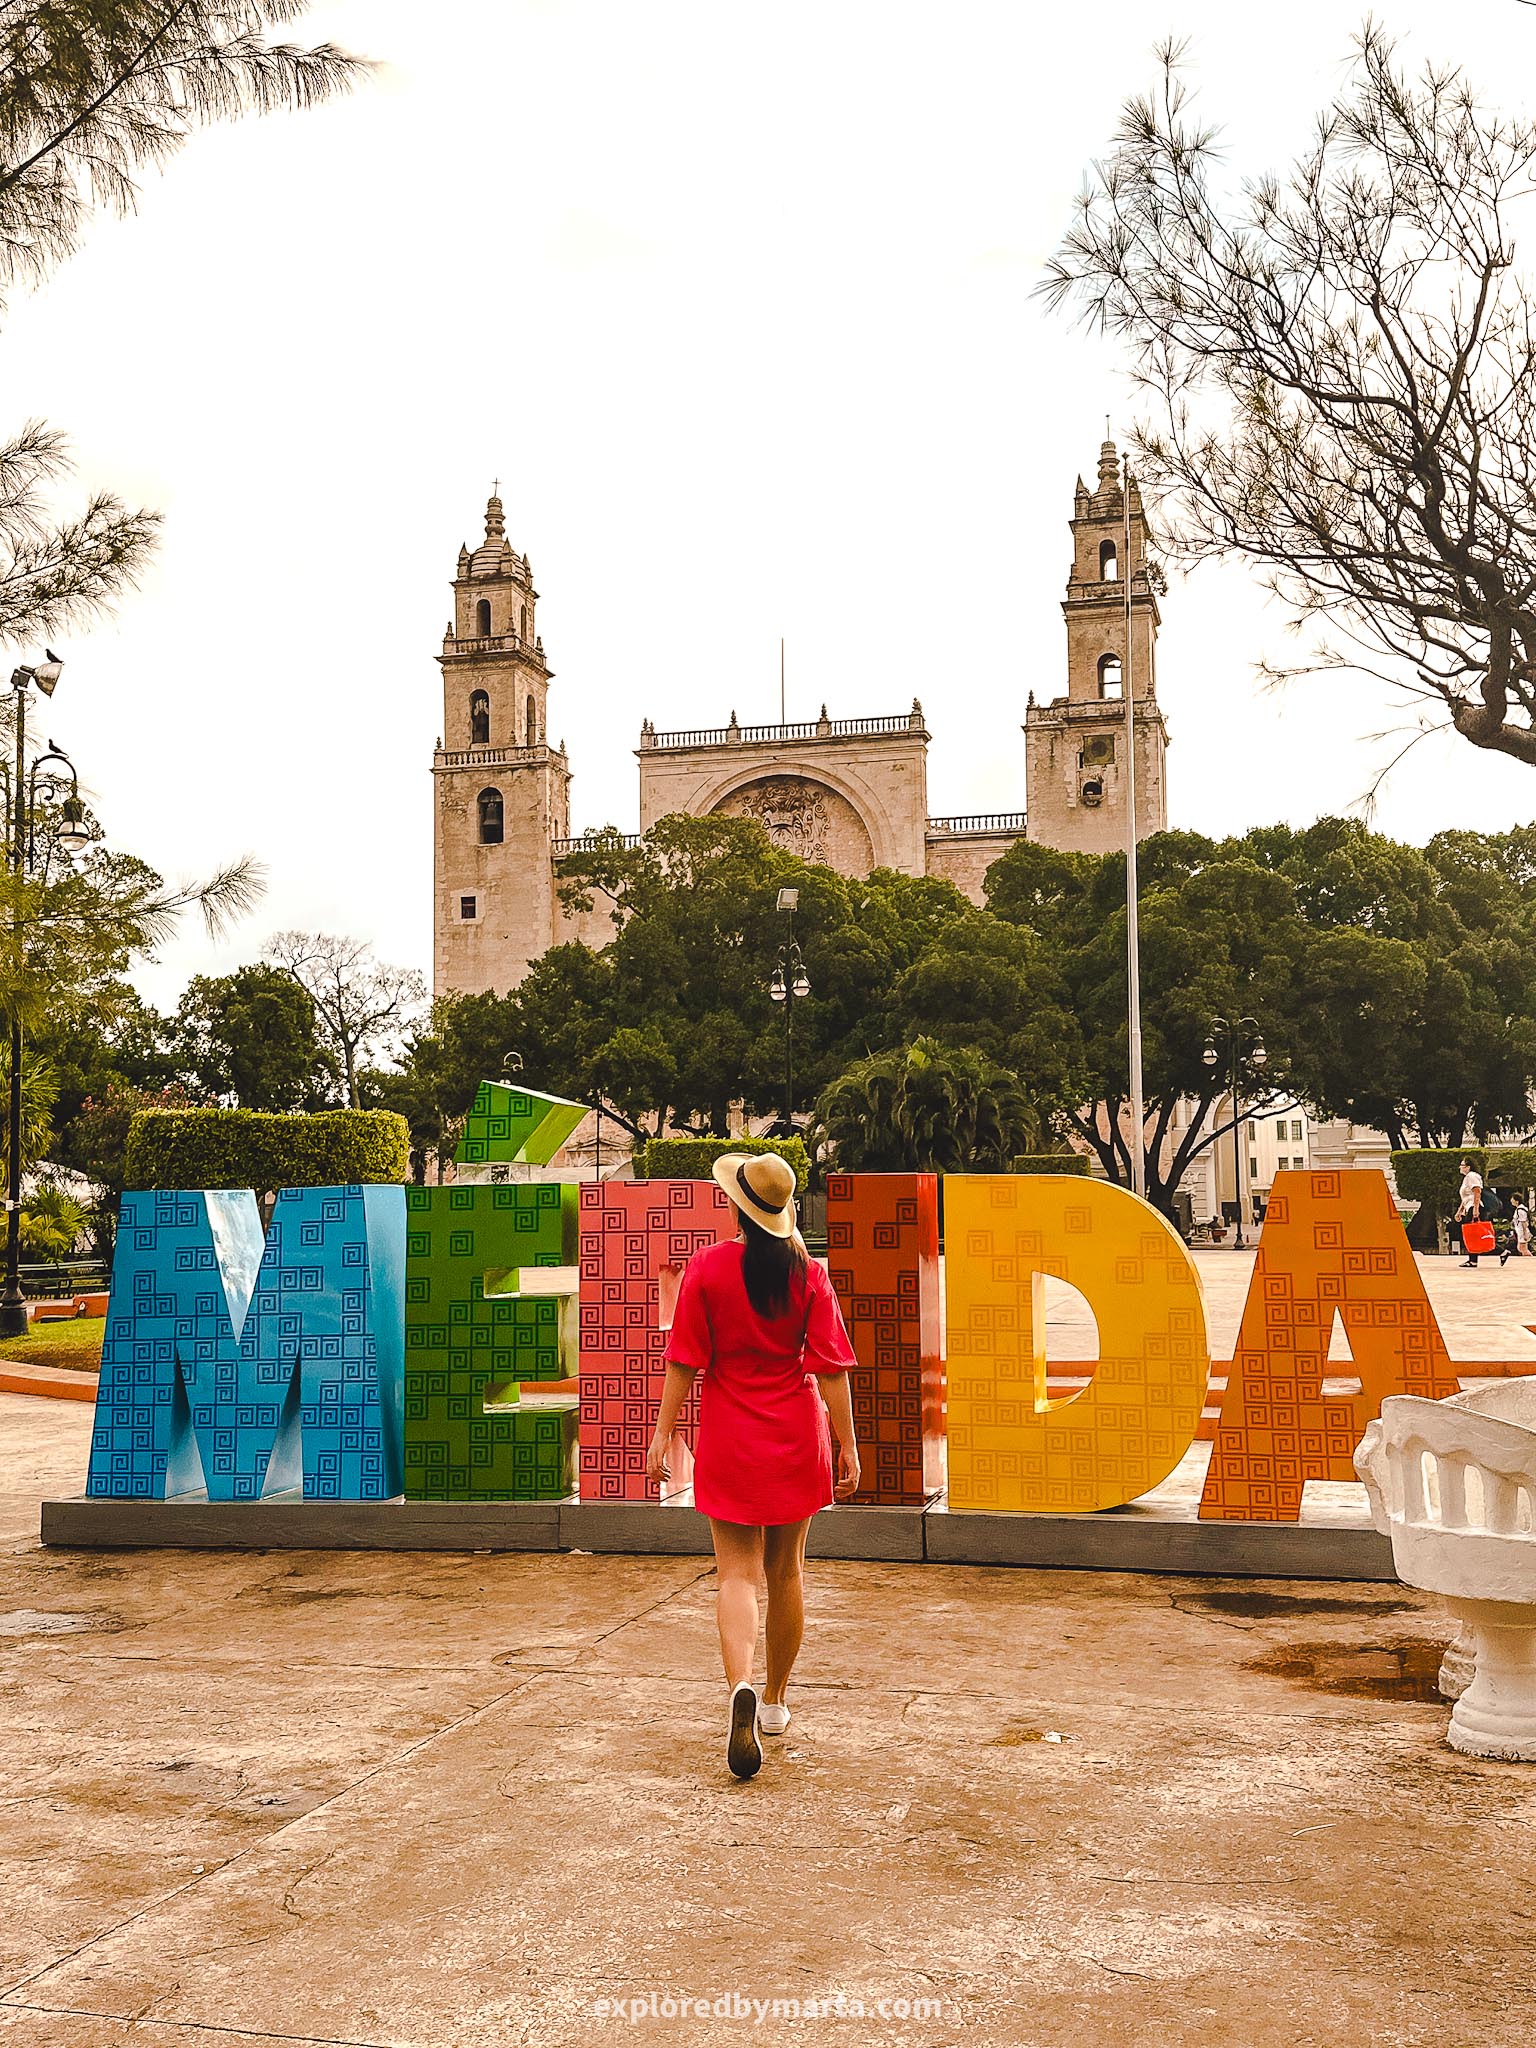 Best Instagram spots in Merida, Mexico - the colorful Merida letters in Plaza Grande park with the Cathedral of Merida towers in the background